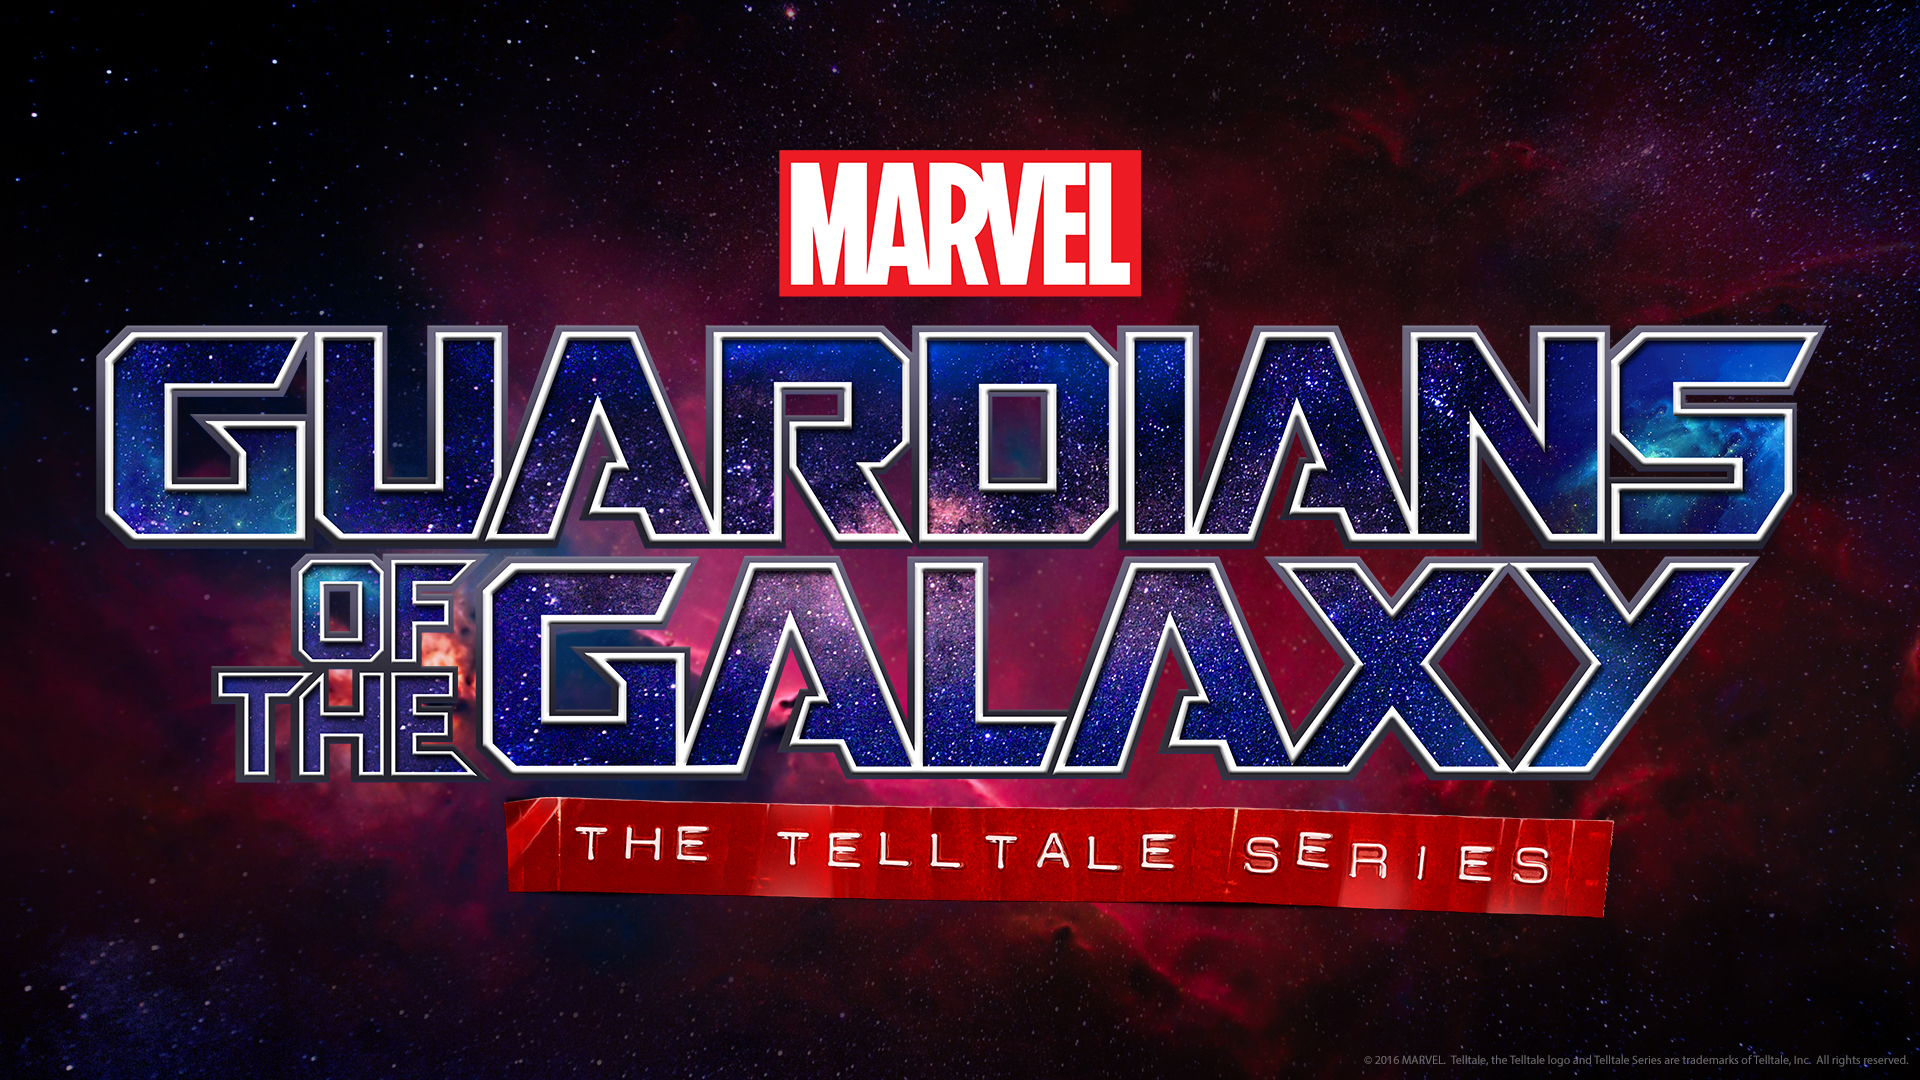 Marvel's Guardians Of The Galaxy - The Telltale Series #18